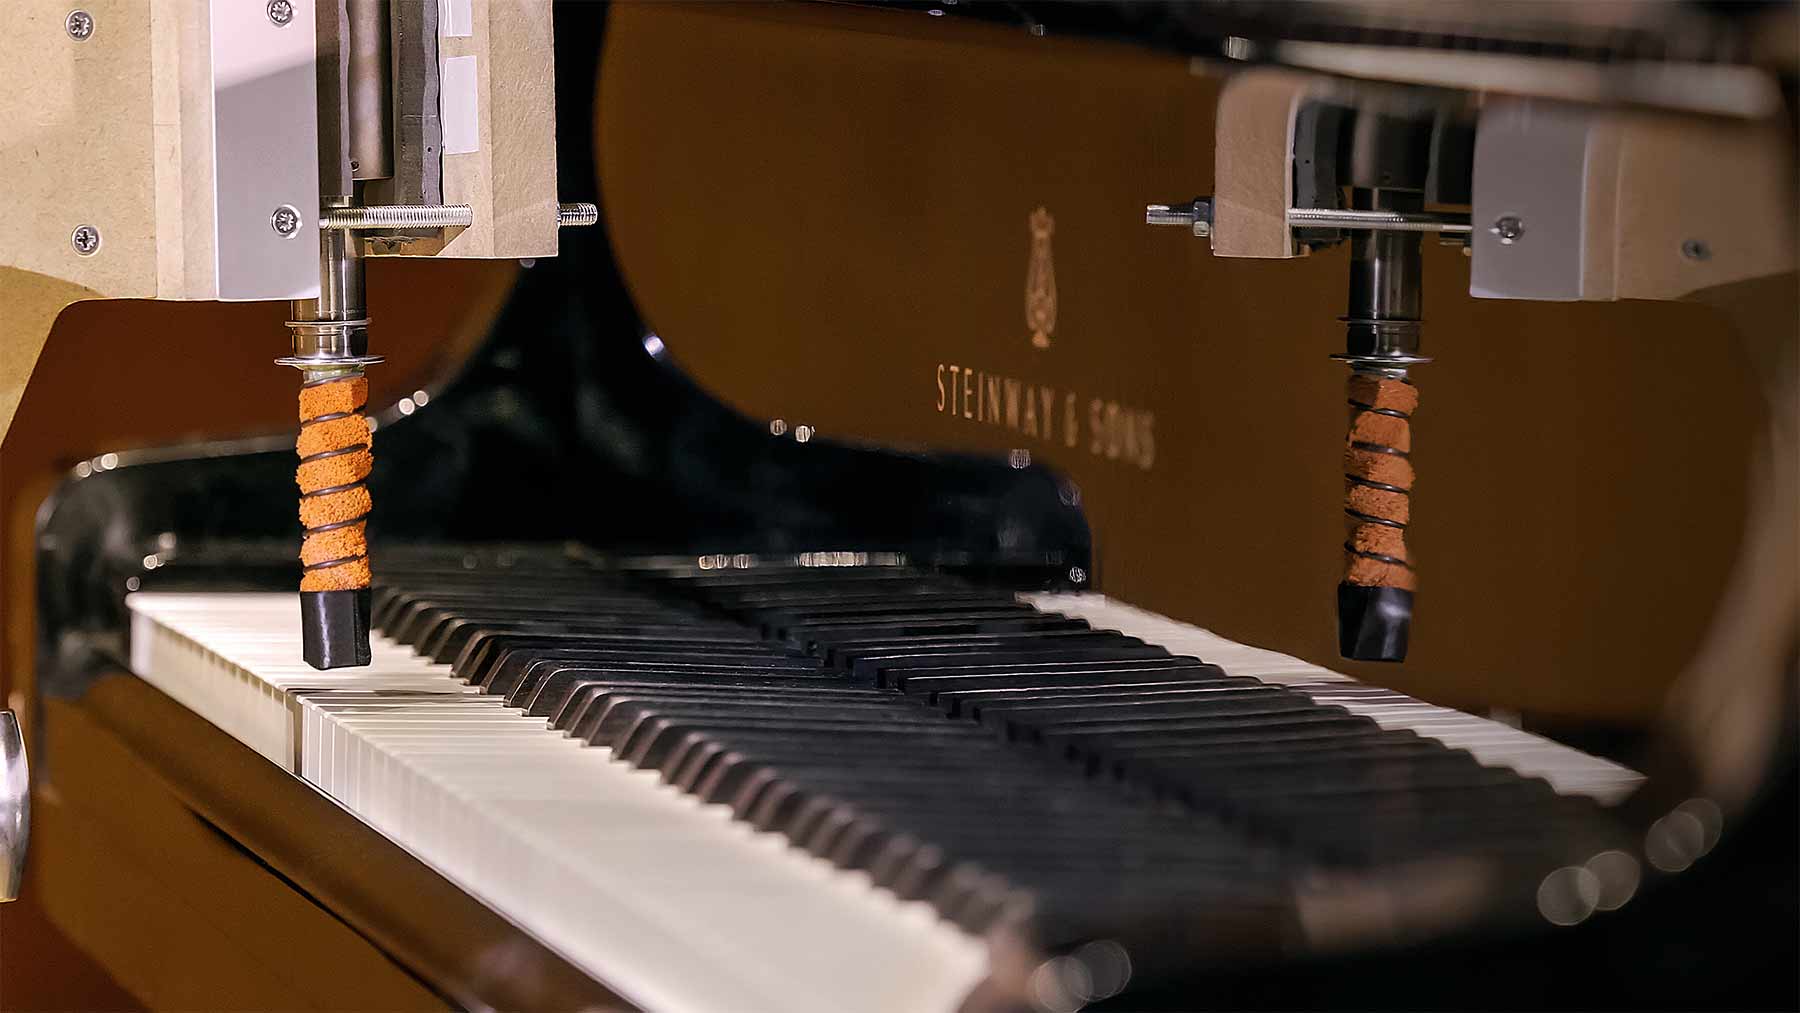 Robotot-assisted sampling of a Steinway & Sons piano